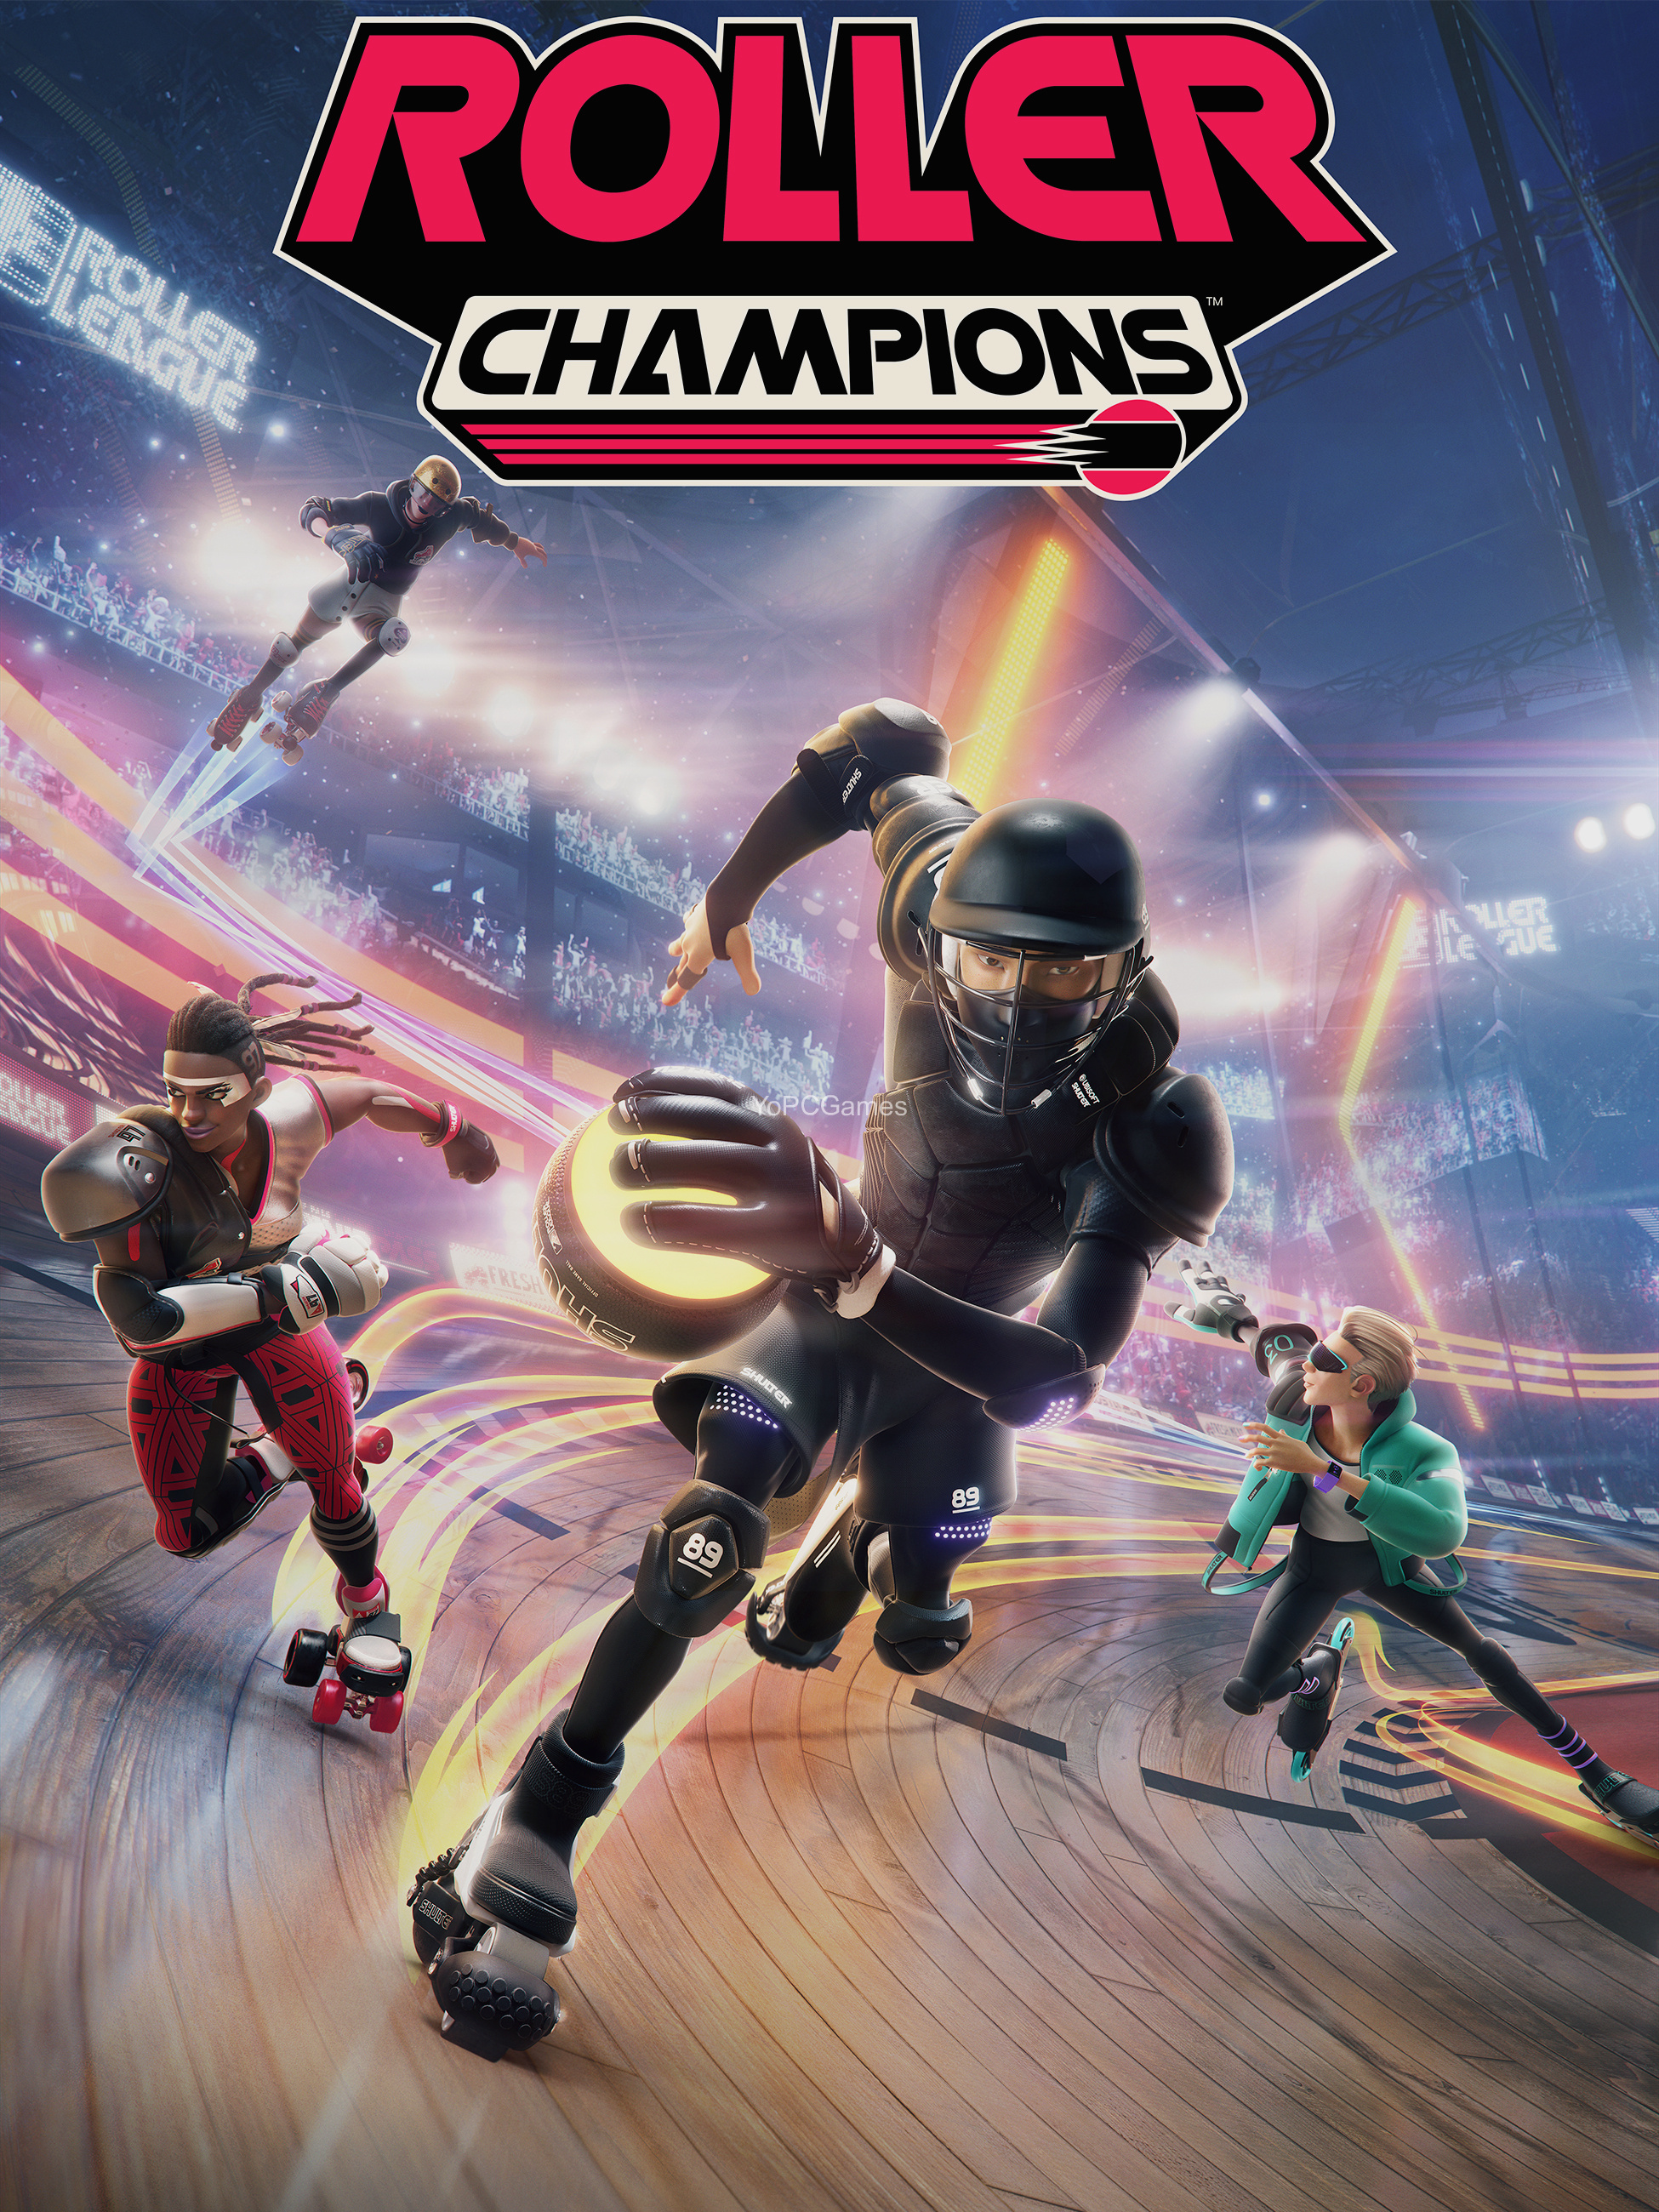 Roller Champions (Game): Two teams of players compete against each other, Throwing a ball into a goal. 1950x2600 HD Wallpaper.